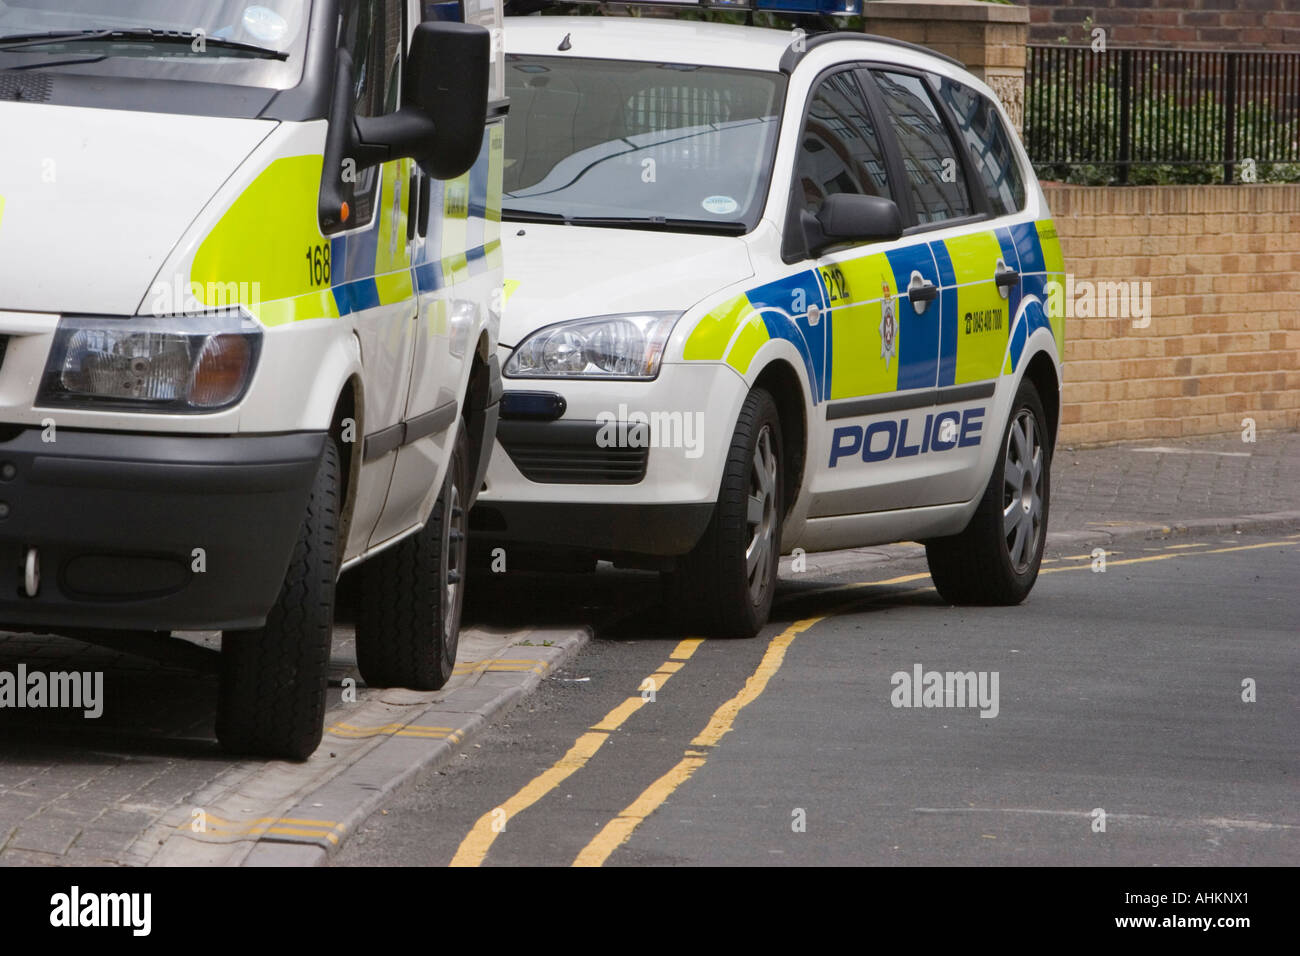 Police vehicles parked on double yellow lines Stock Photo